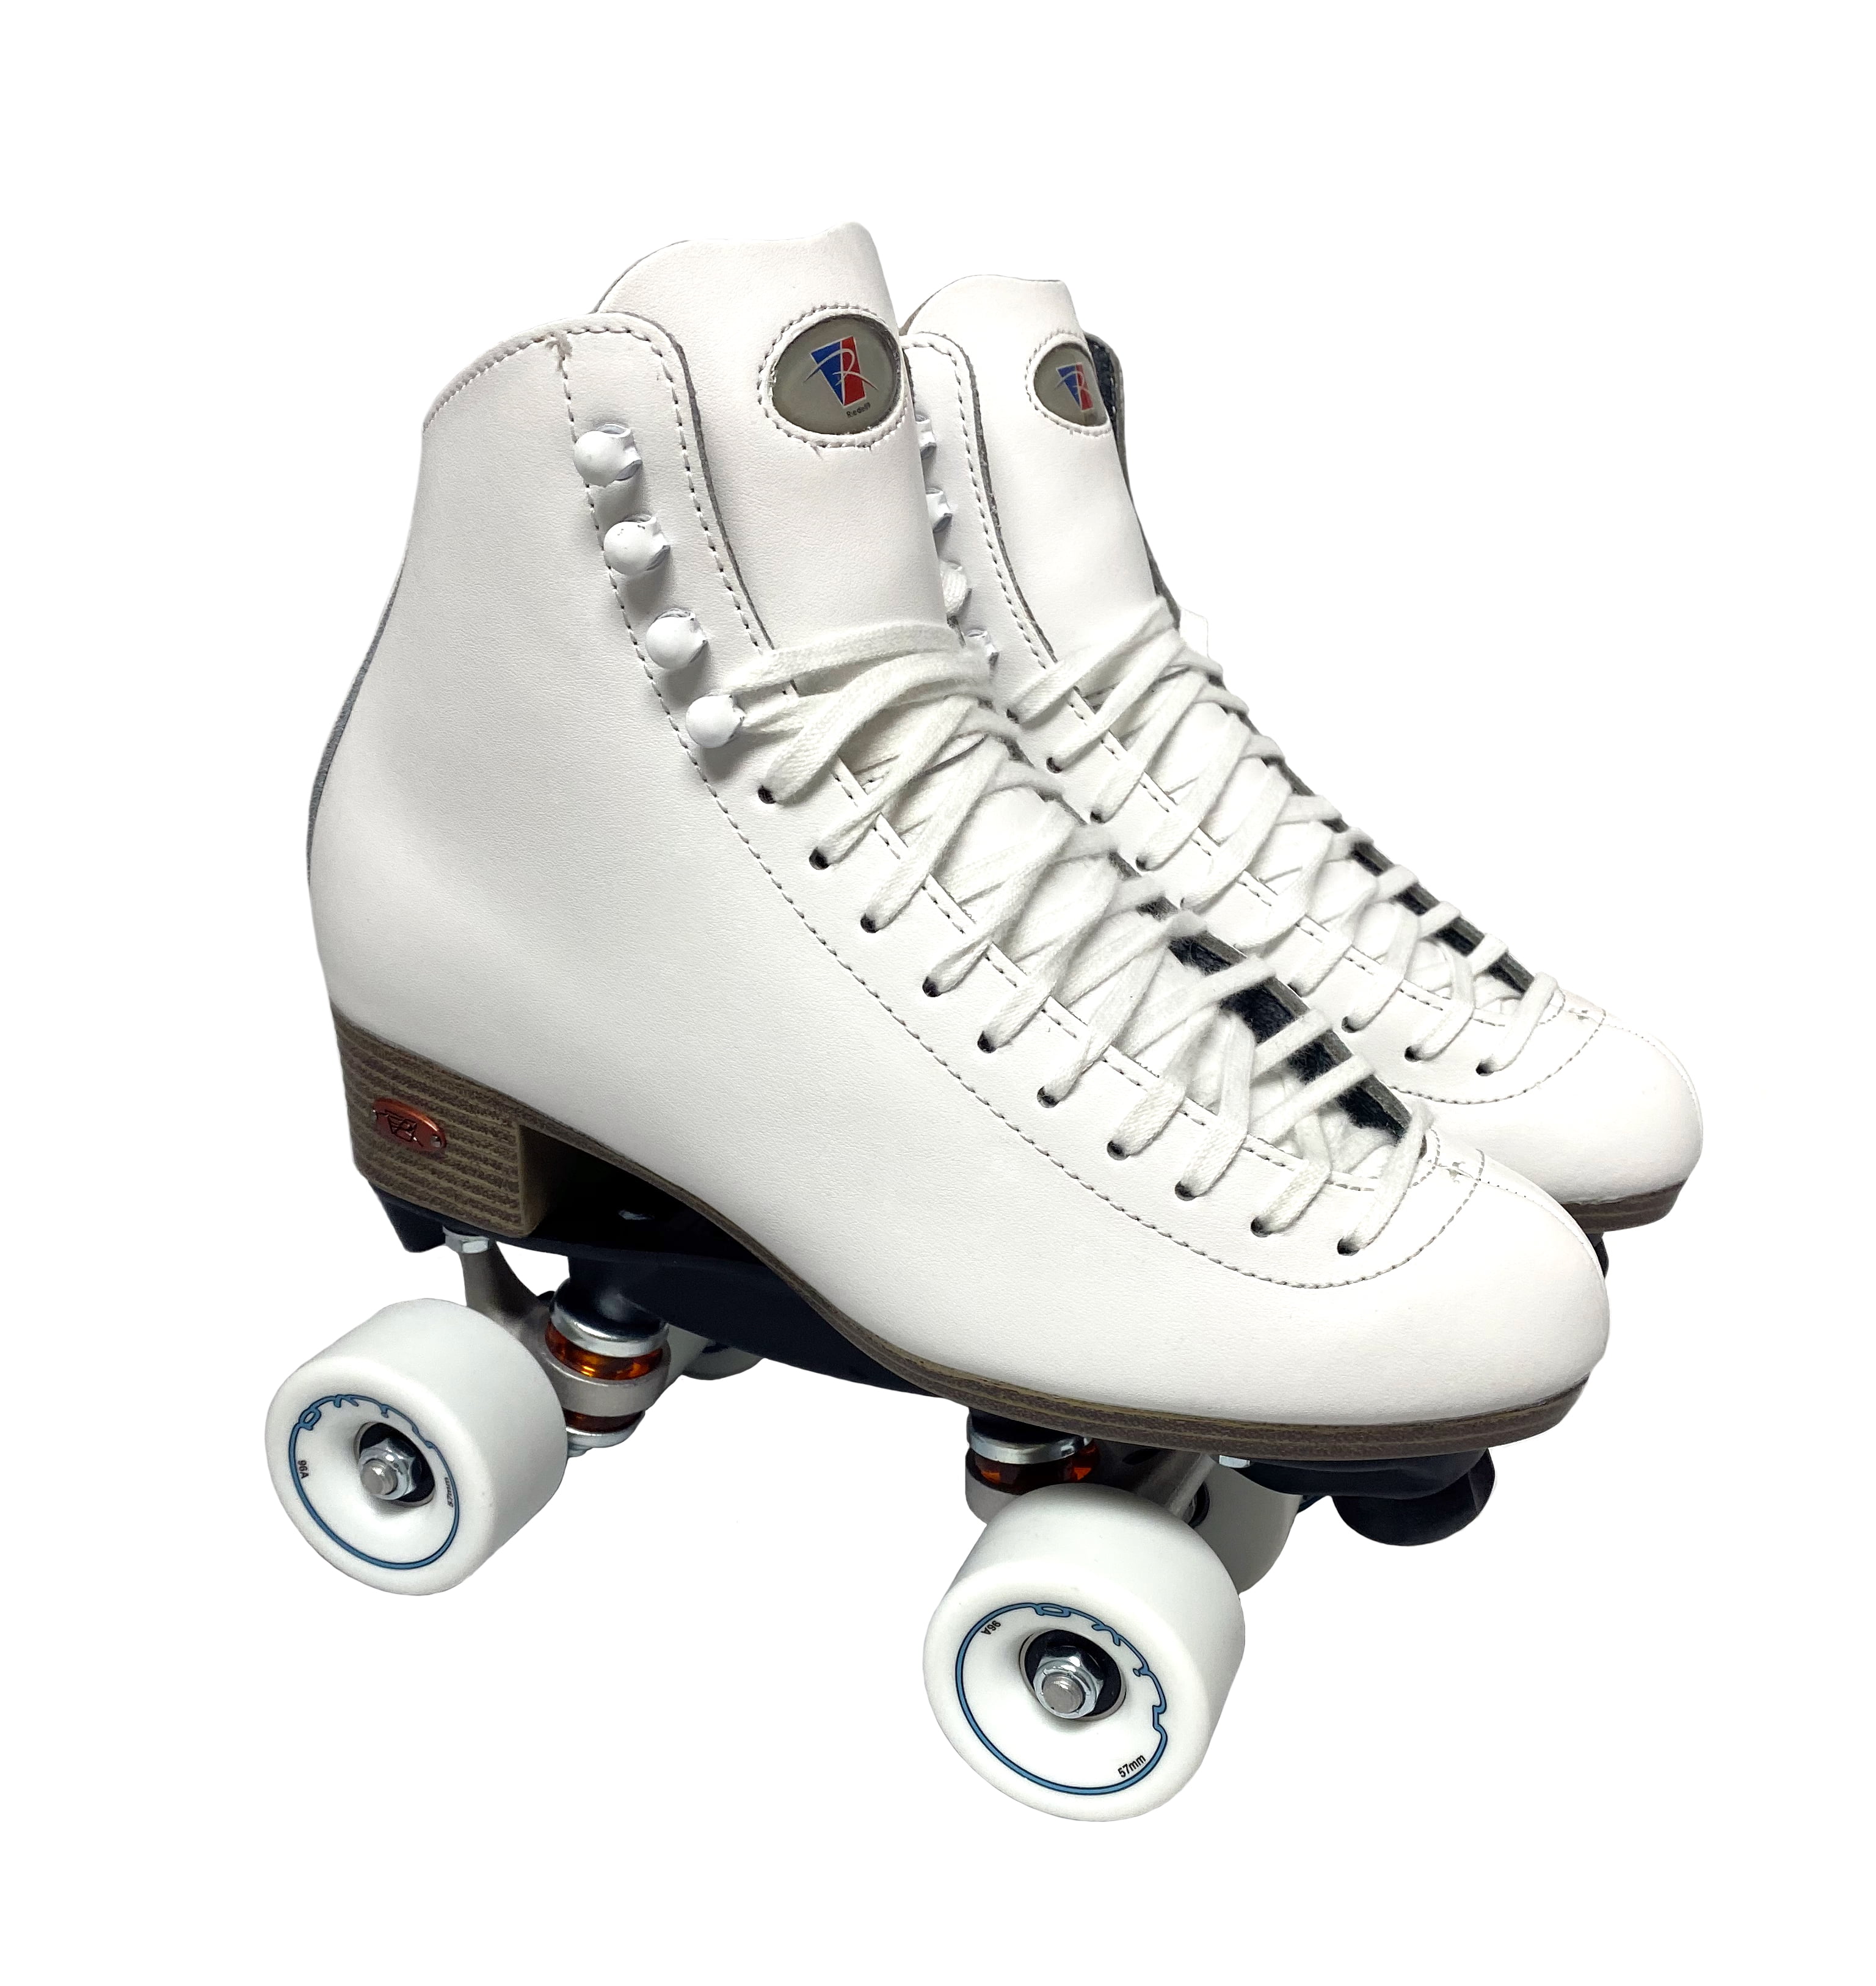 White Free Next working day delivery Riedell R3 Quad Roller Skates 